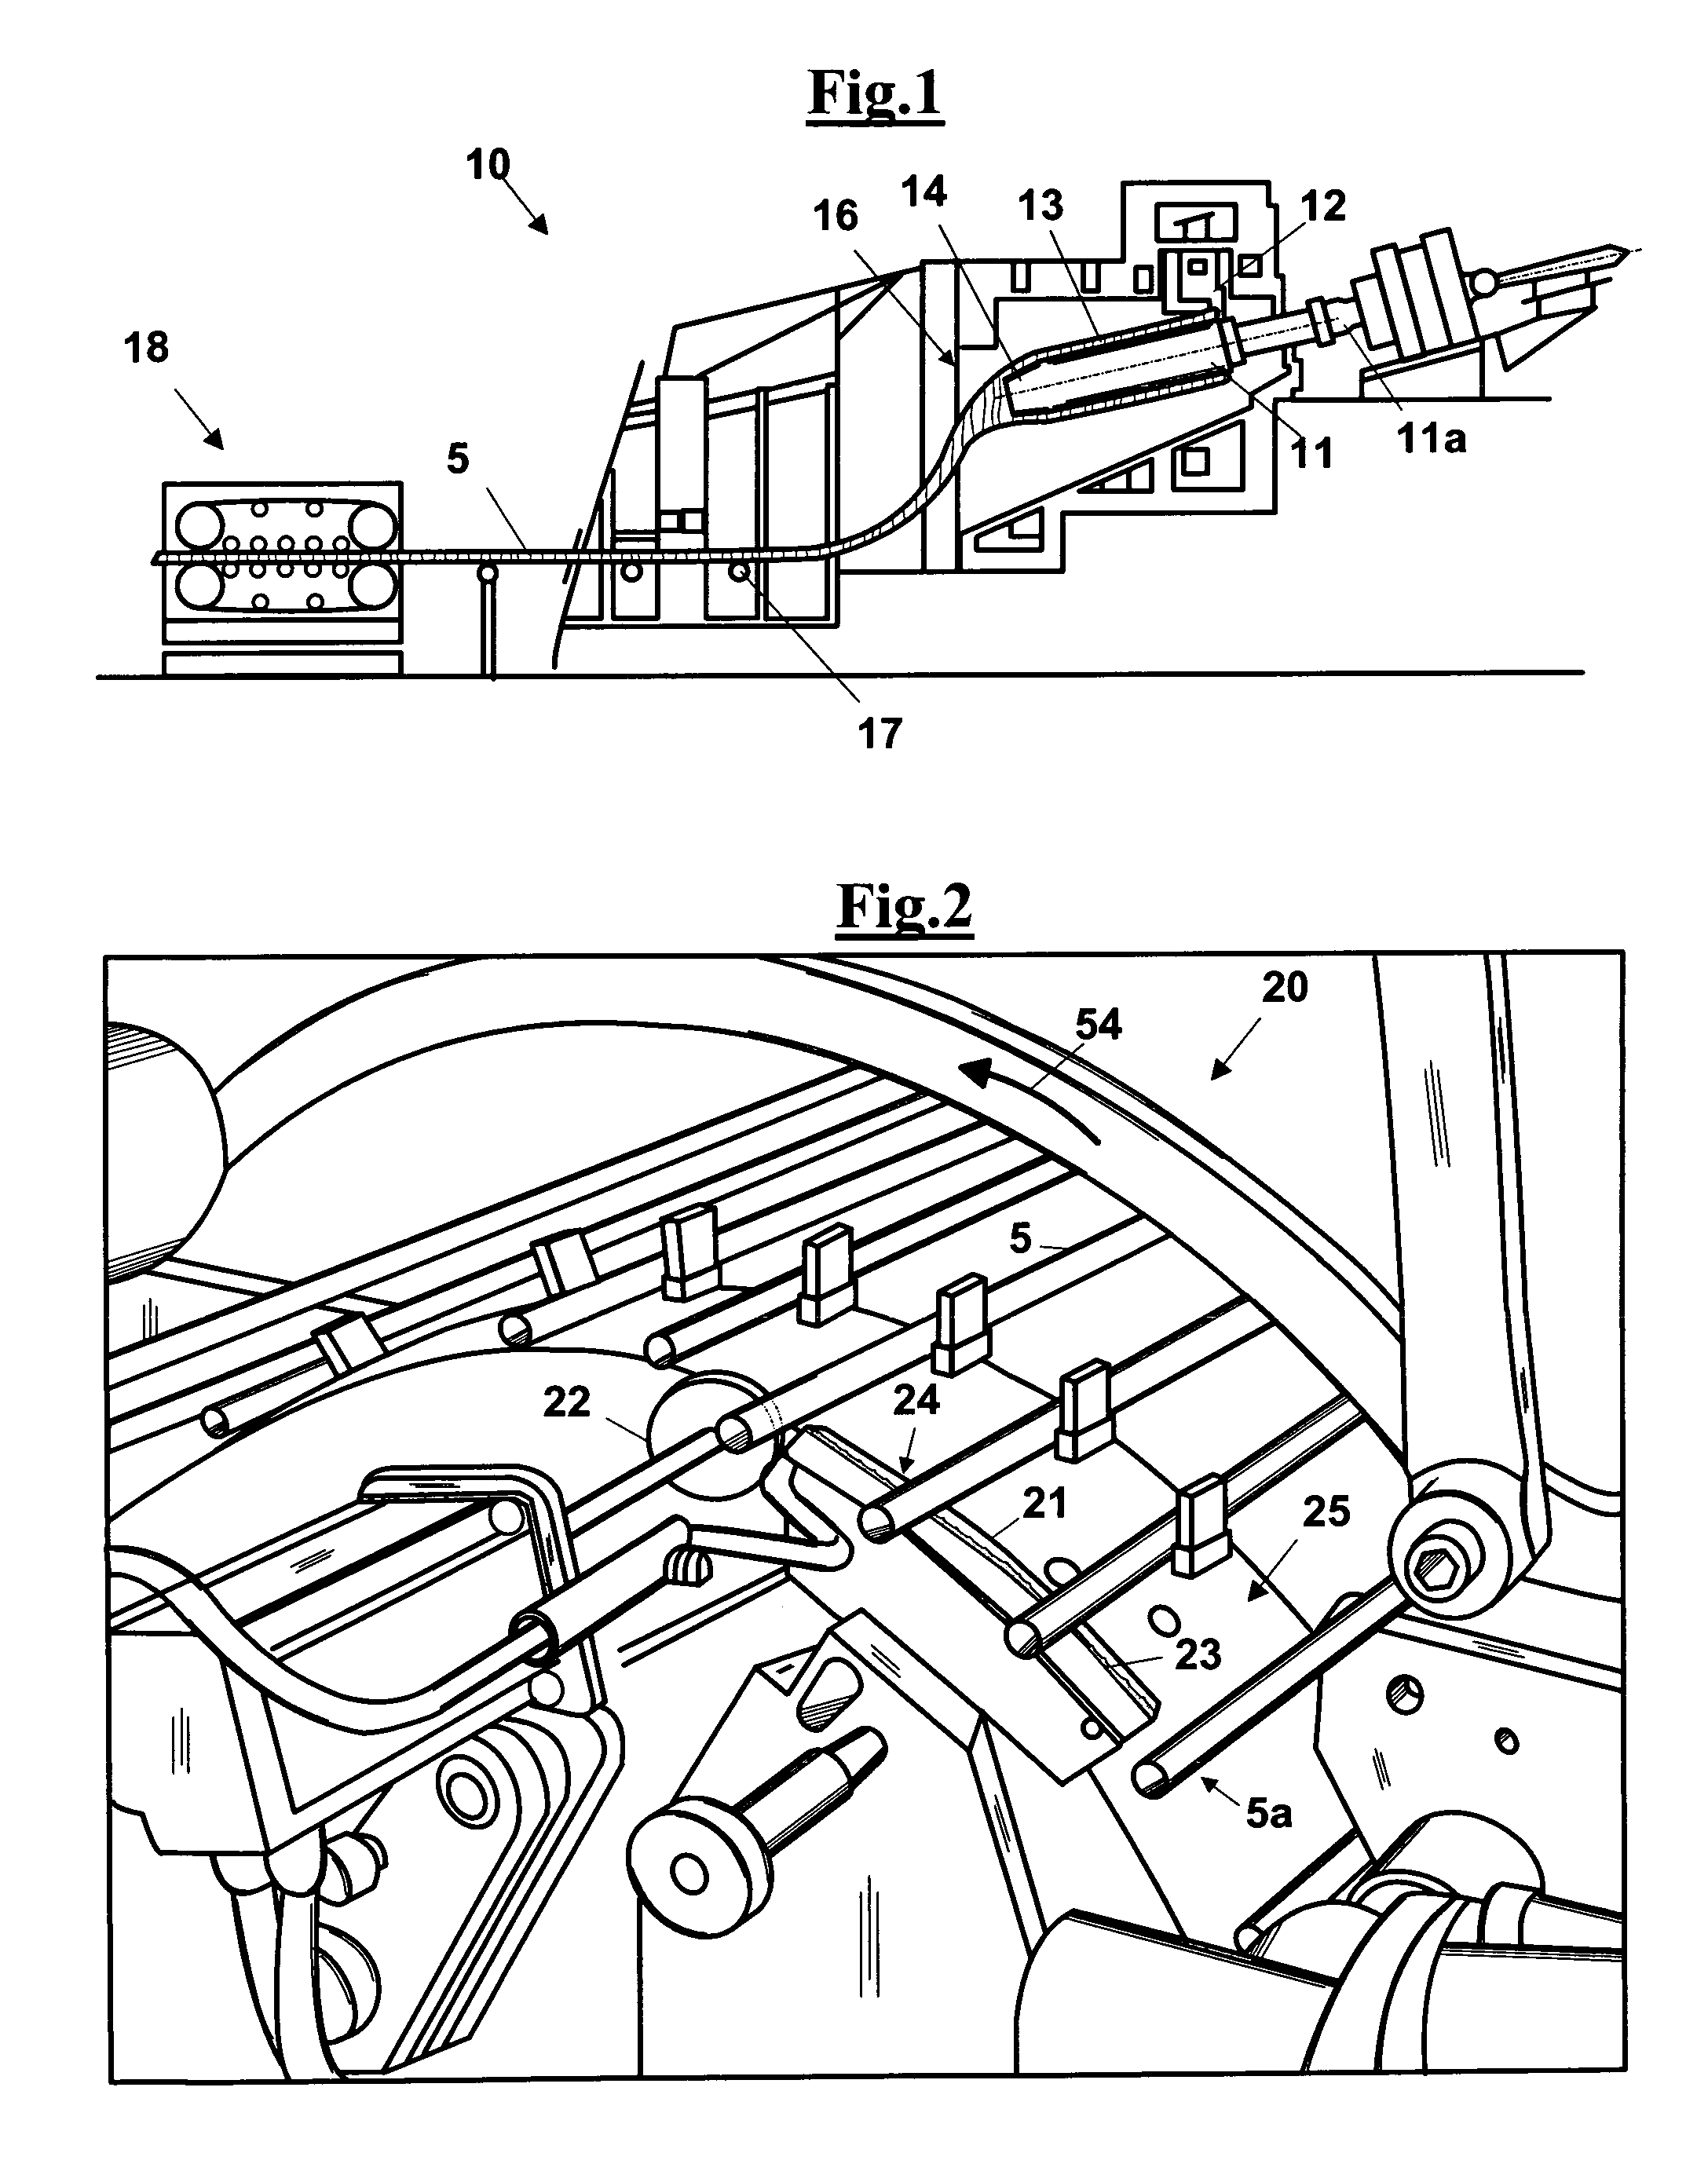 Method and device for removing contaminating particles from containers